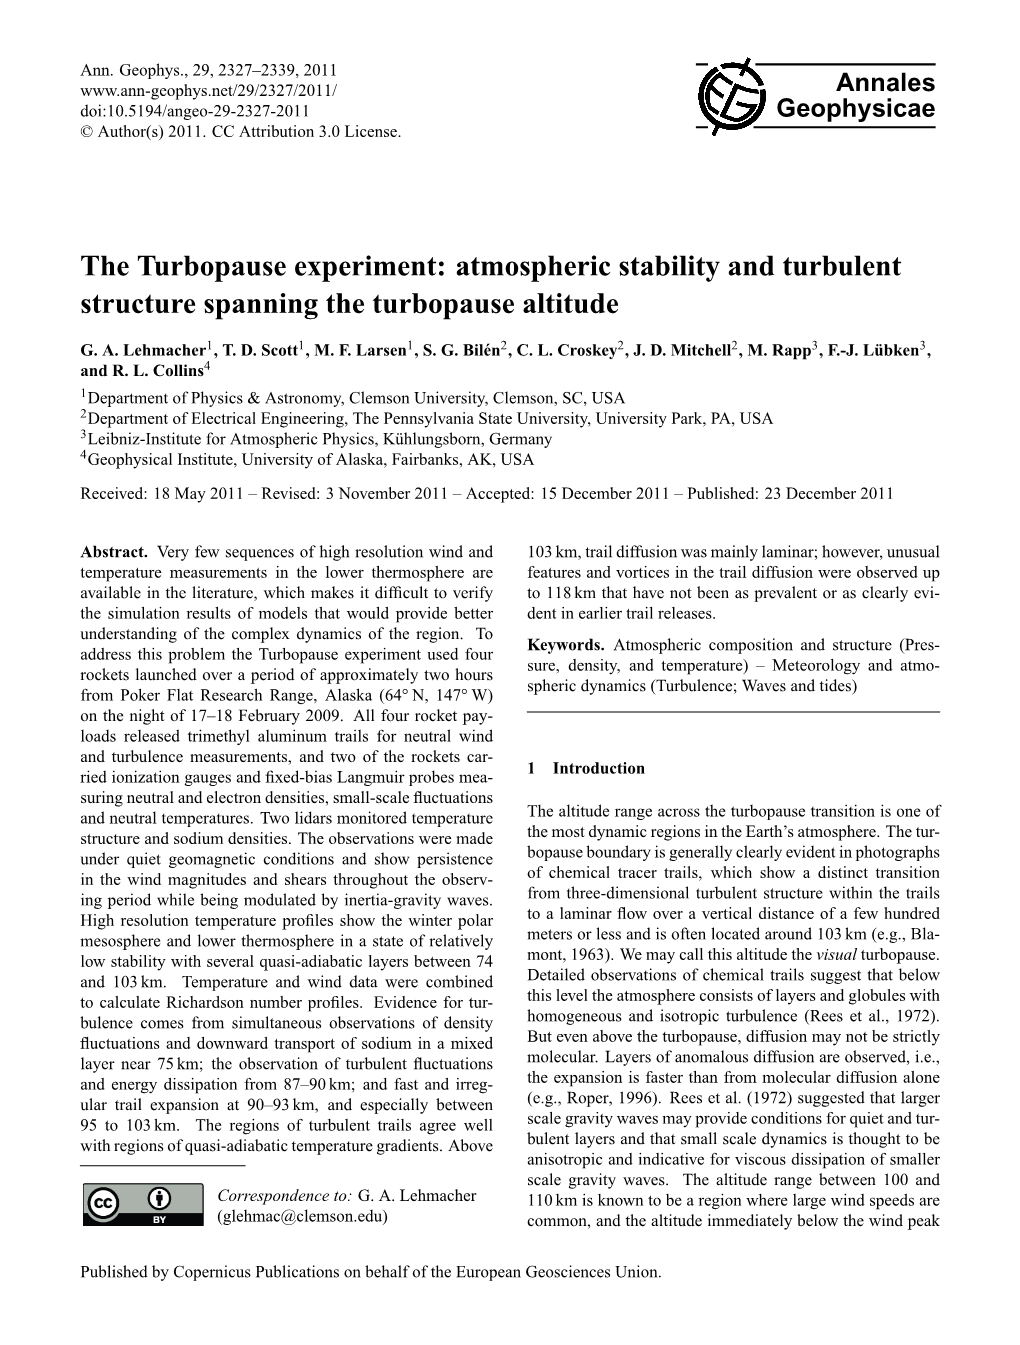 The Turbopause Experiment: Atmospheric Stability and Turbulent Structure Spanning the Turbopause Altitude